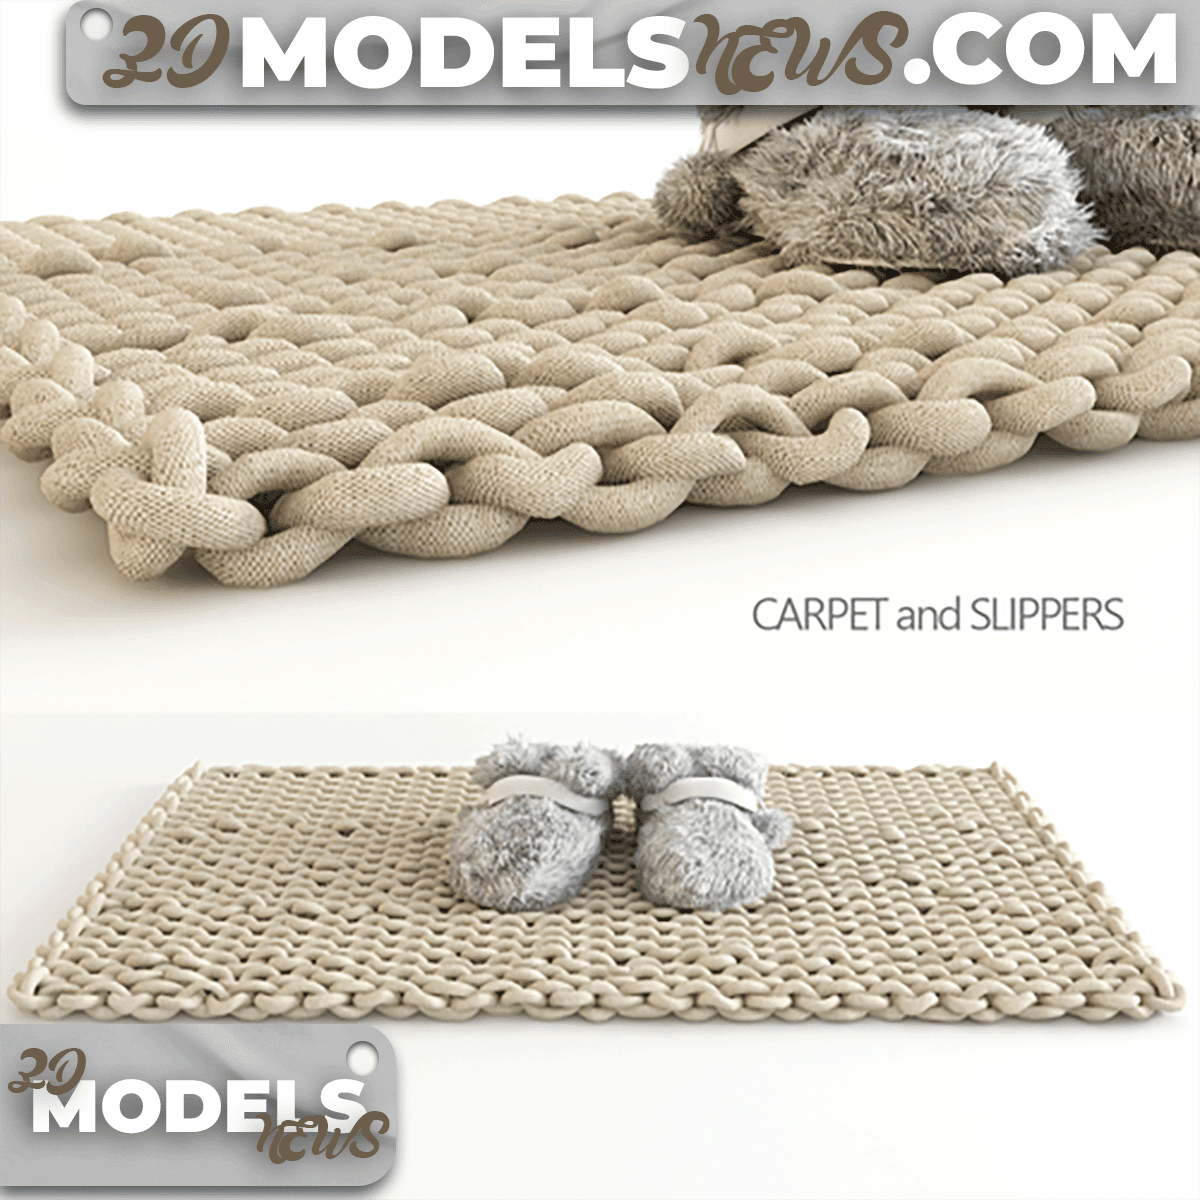 Carpet and Slippers Model A1 1